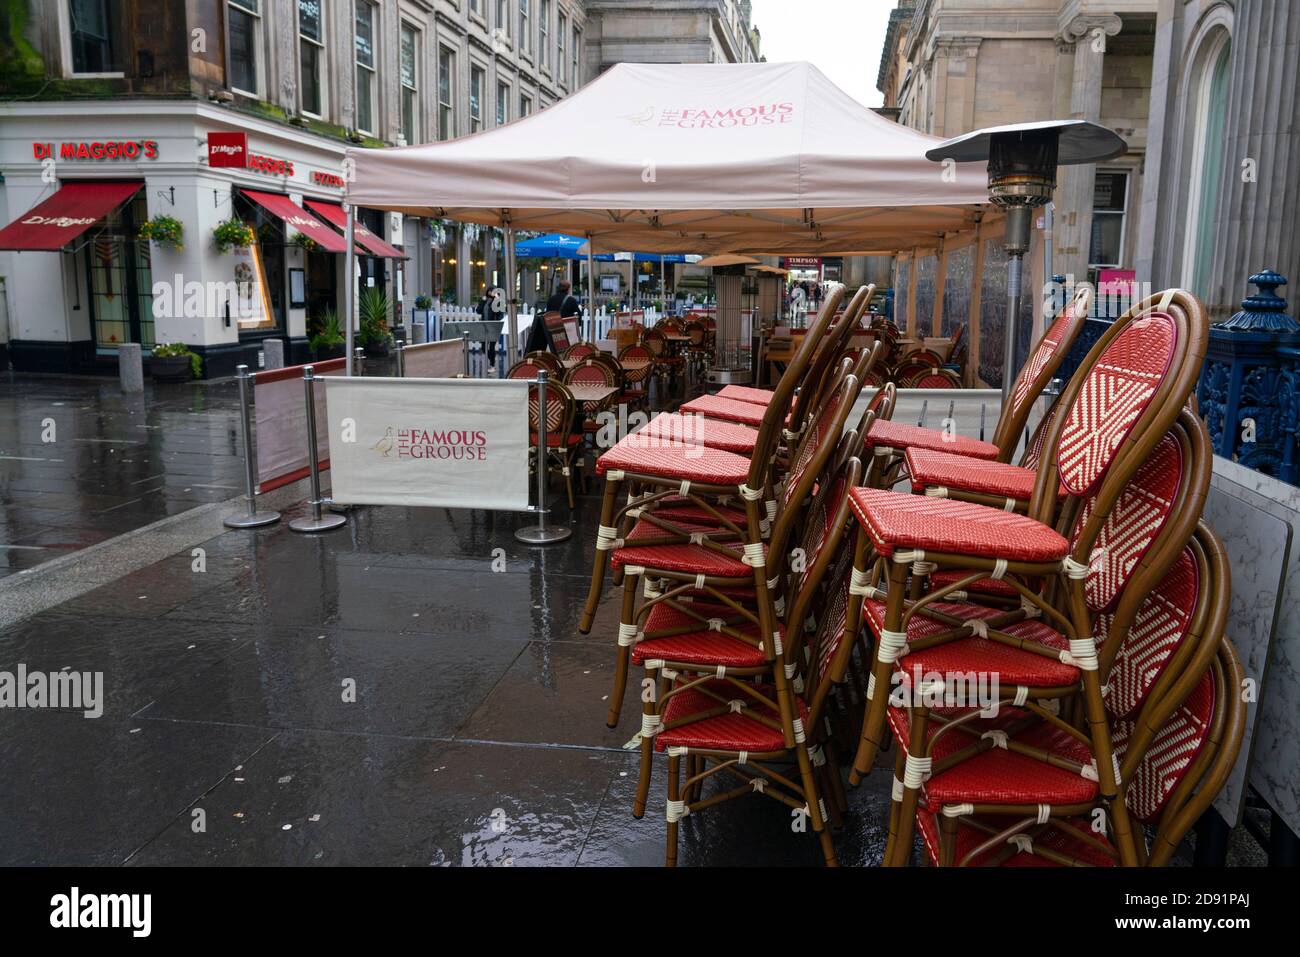 Glasgow,Scotland, UK. 2 November 2020. As Scotland enters new Coronavirus lockdown regulations the central belt and Glasgow are placed in Level 3 . Members of the public are seen out on the streets of central Glasgow for shopping and work. Pictured; Chairs stacked up at Di MaggioÕs restaurant with outdoor seating area empty.   Iain Masterton/Alamy Live News Stock Photo